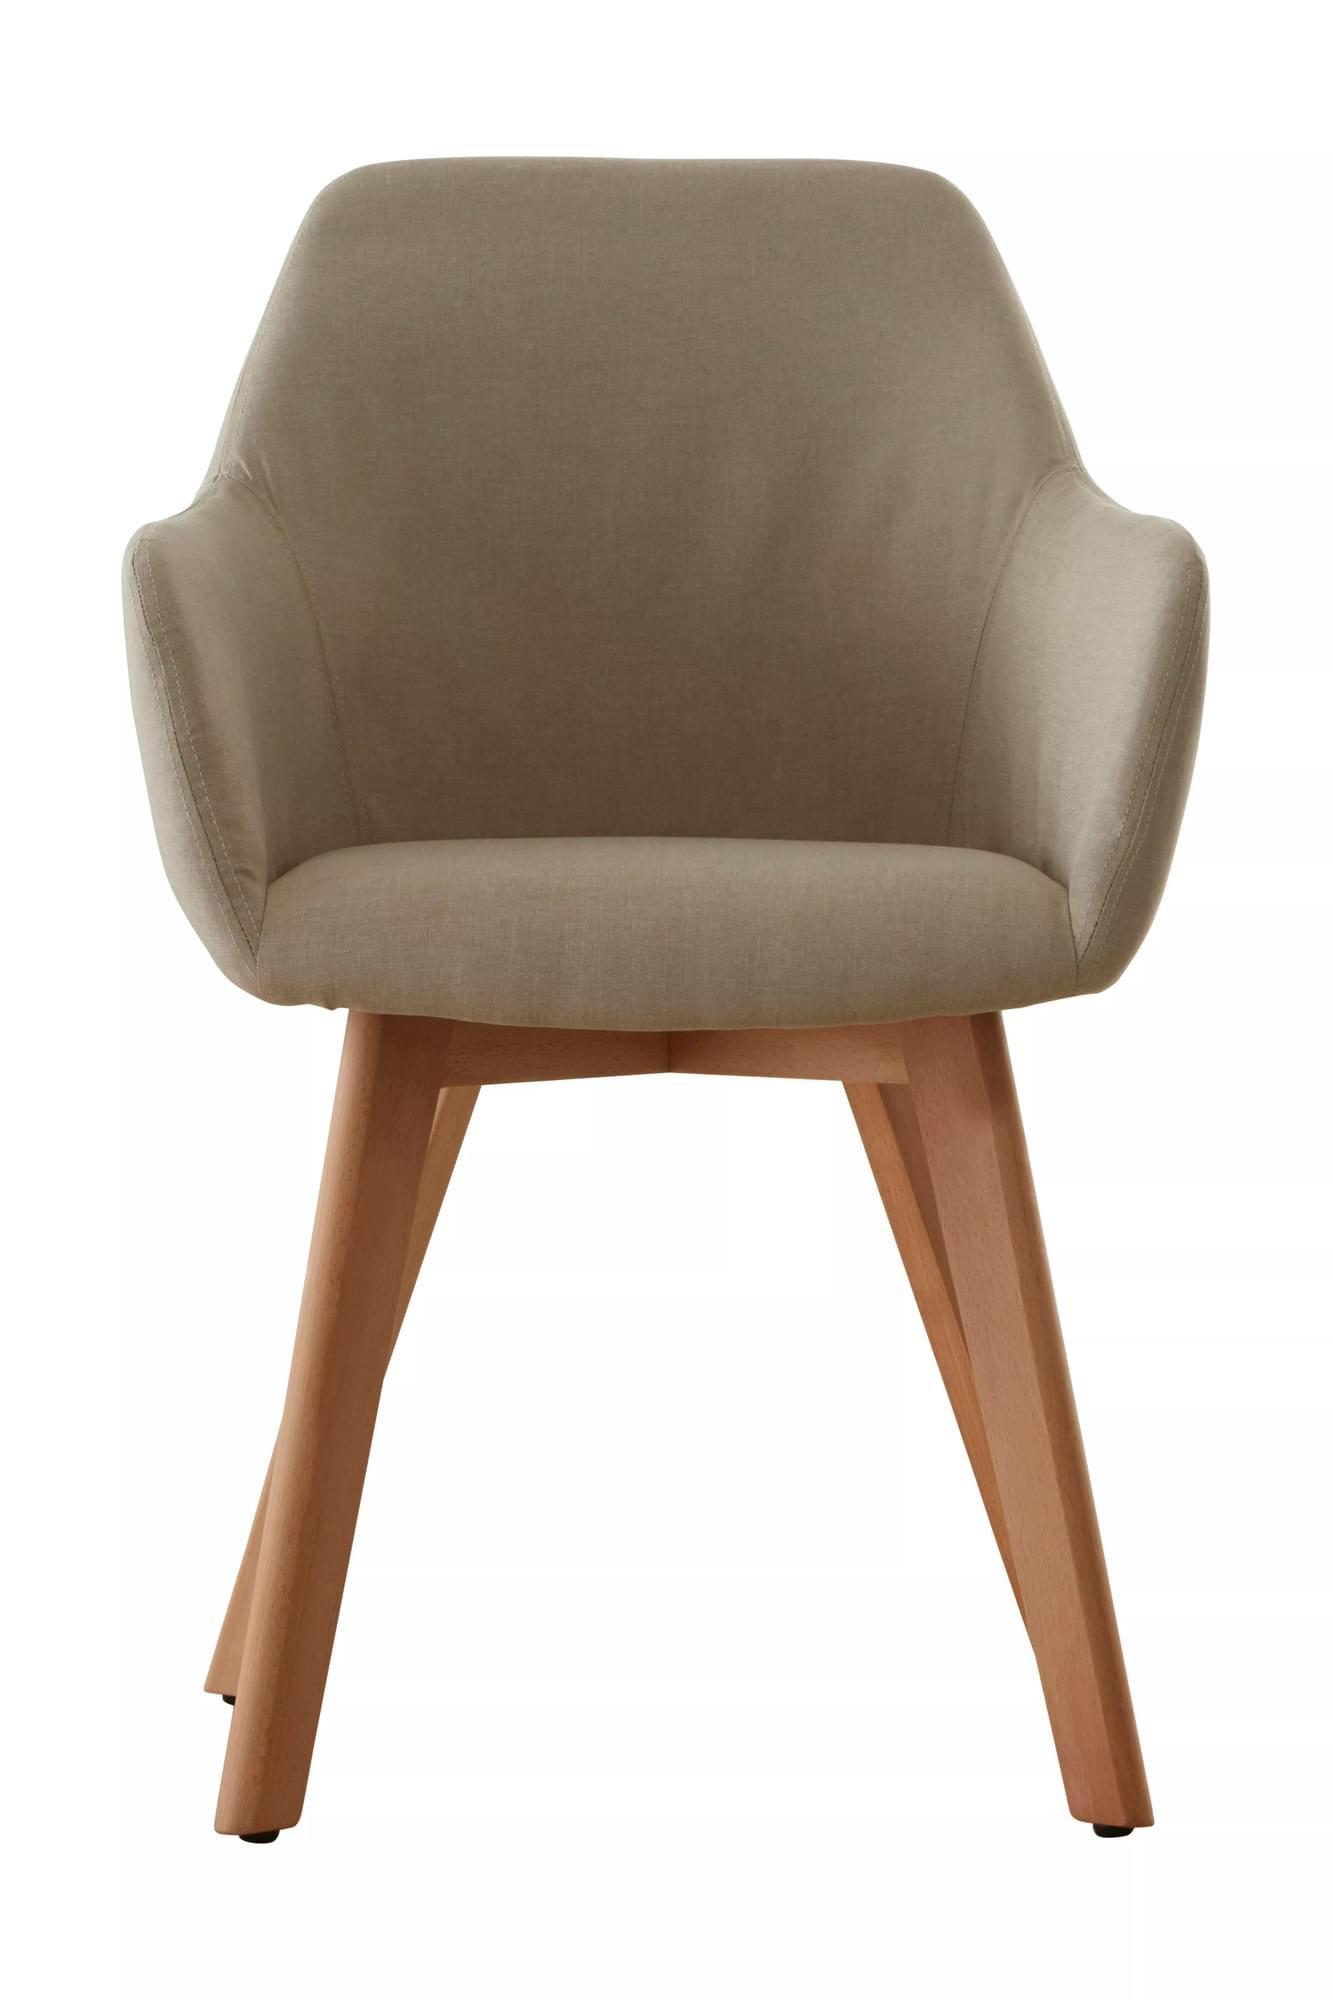 Interiors by Premier Stockholm Fabric Chair